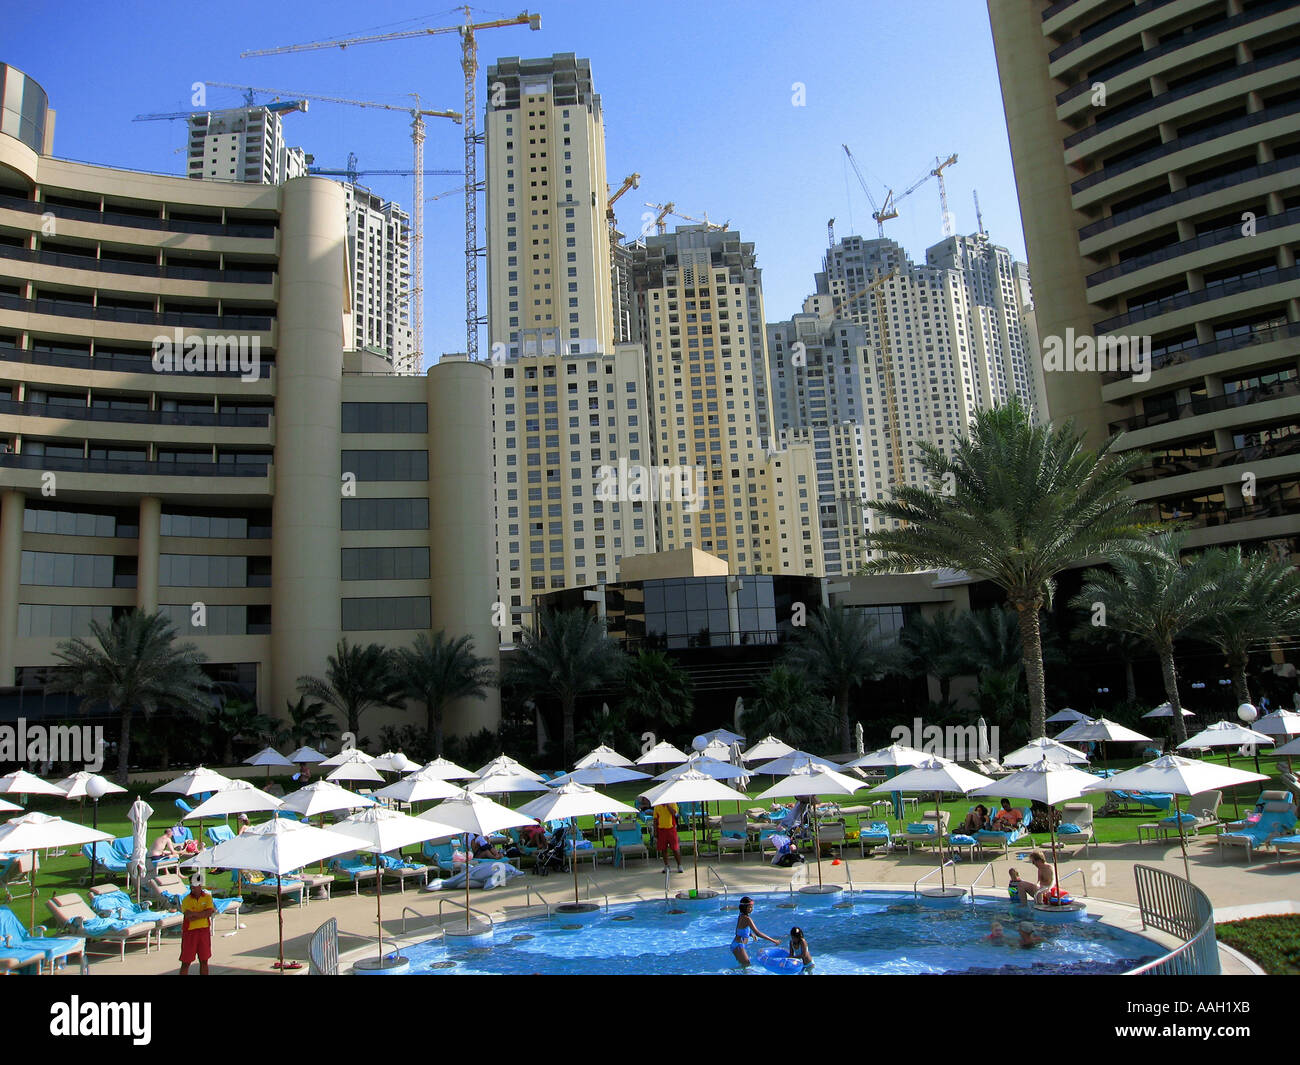 Construction of new high rise buildings in Jumeirah, Dubai, United Arab Emirates with hotel pool in foreground Stock Photo